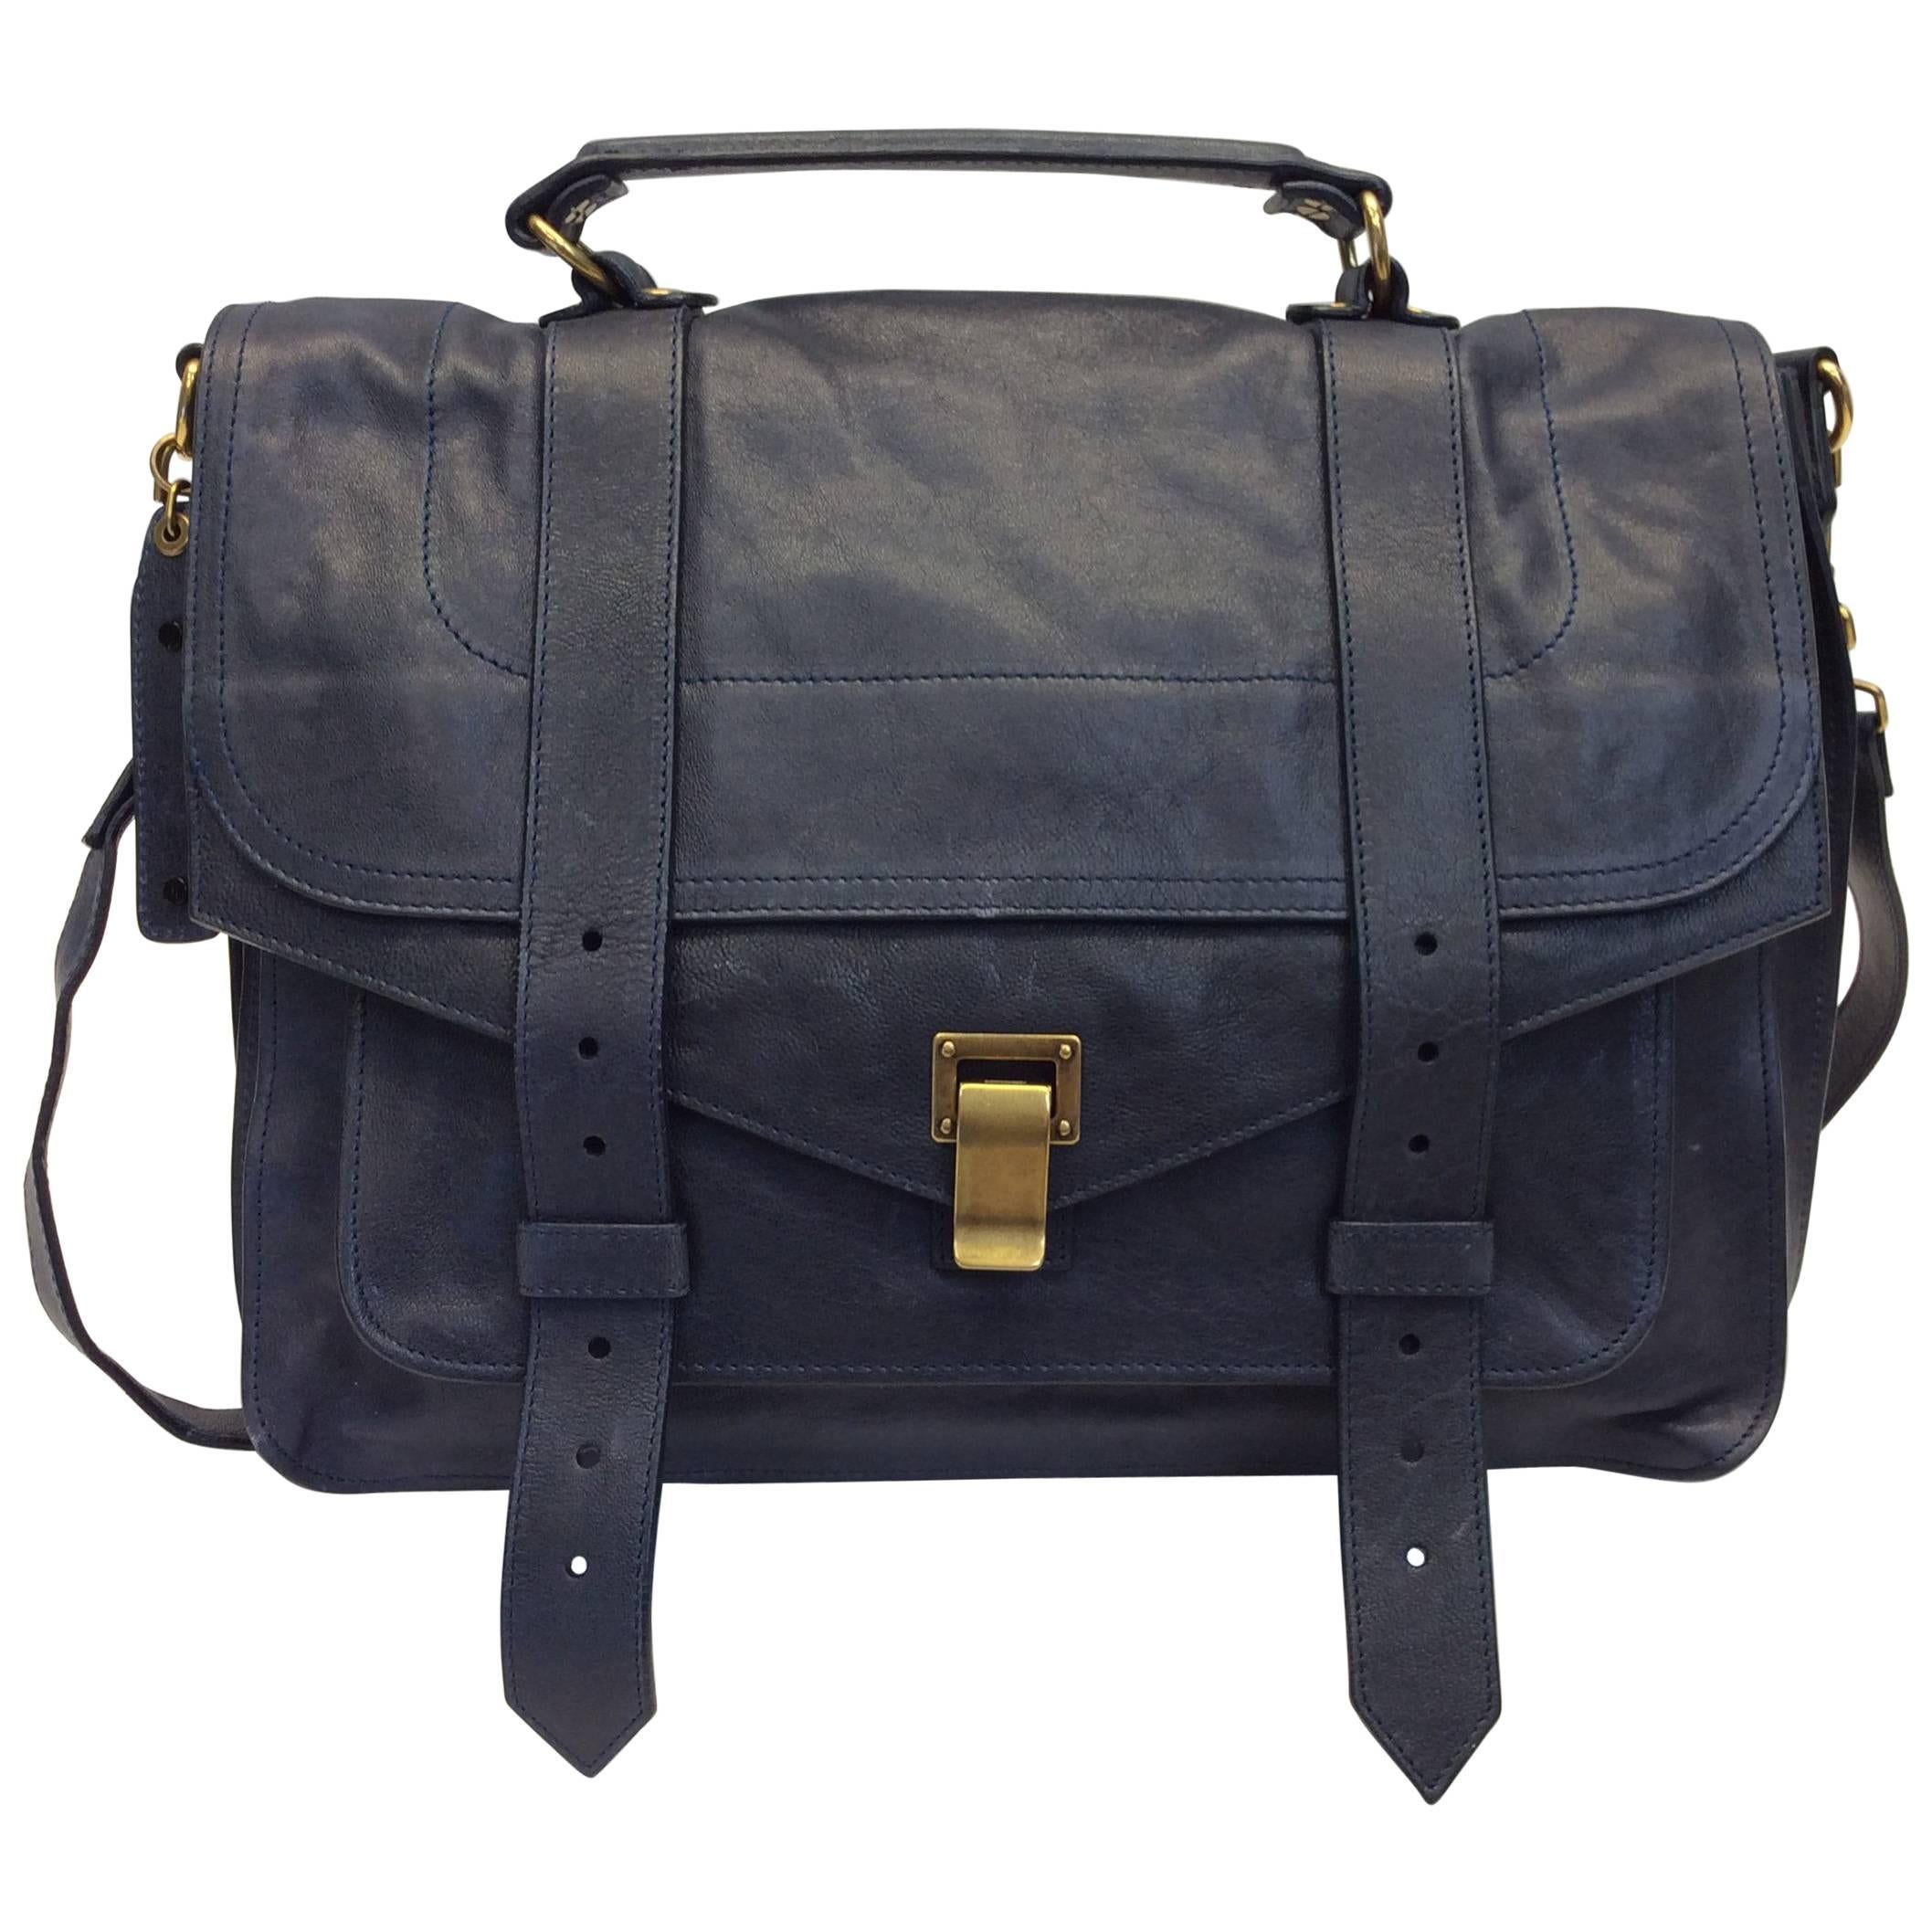 Proenza Schouler Navy Blue Leather Messenger Bag NWT For Sale